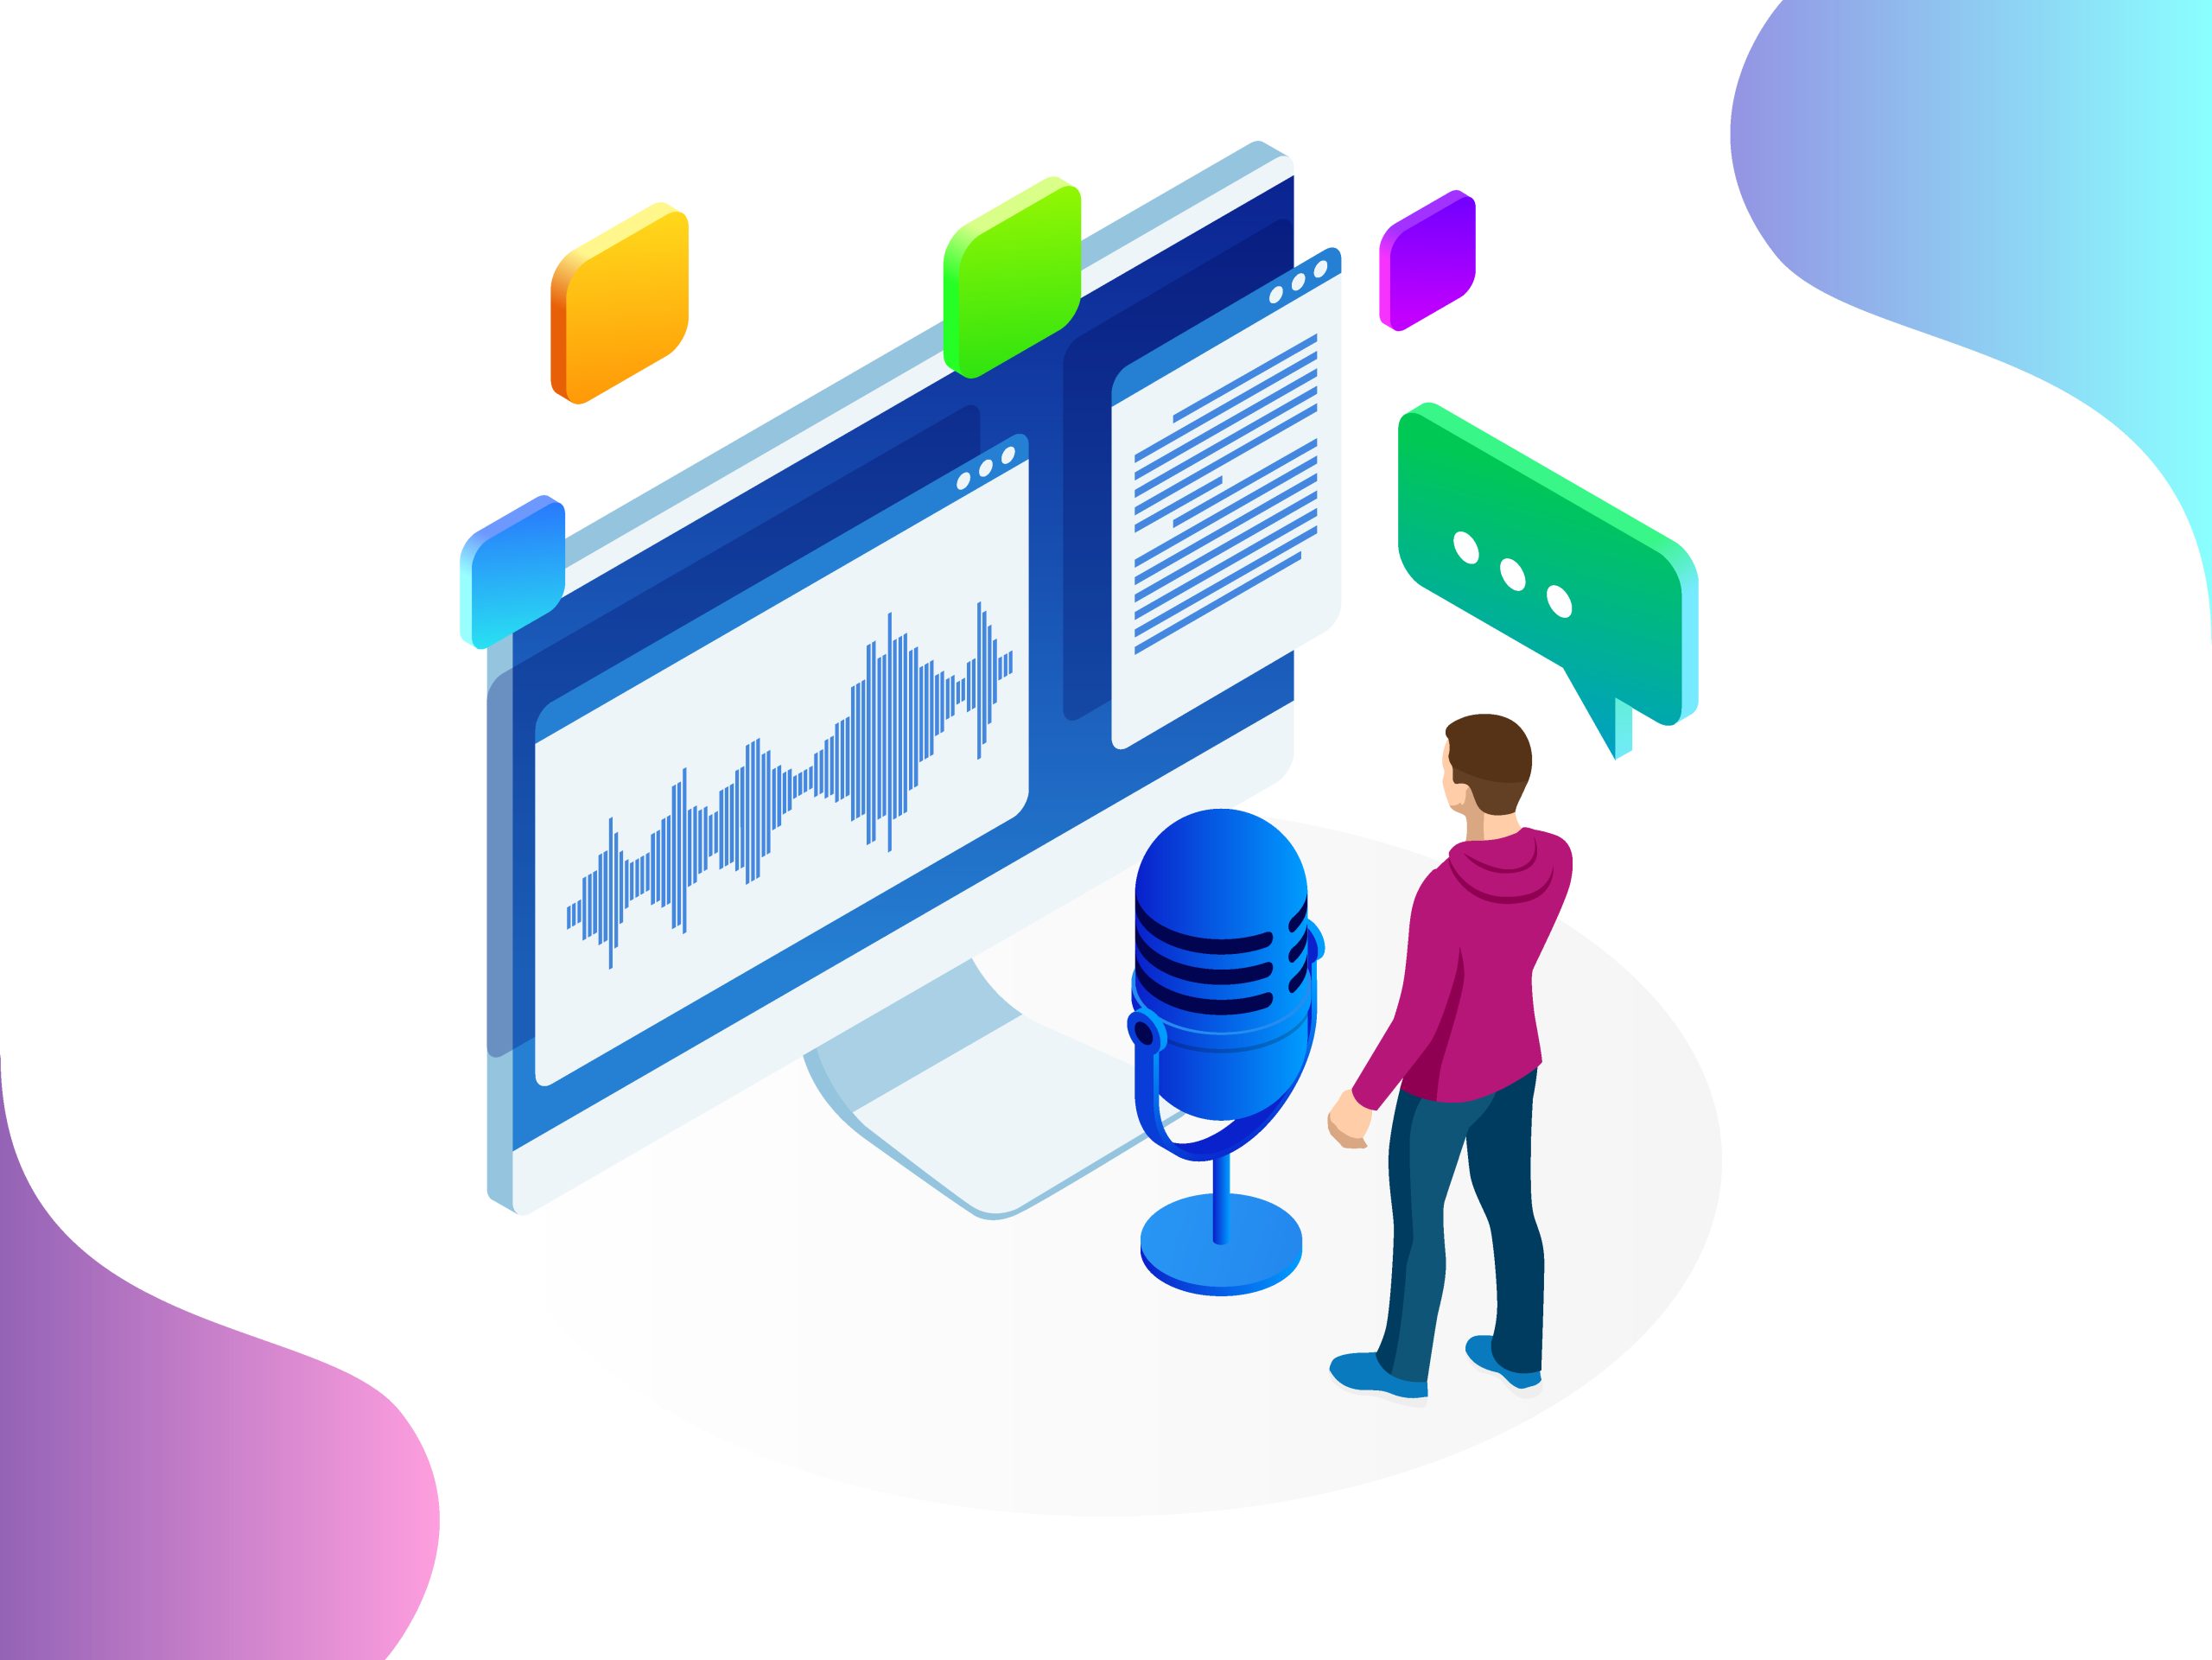 Isometric speech recognition, intelligent personal assistant created concept. Voice recognition vector illustration.